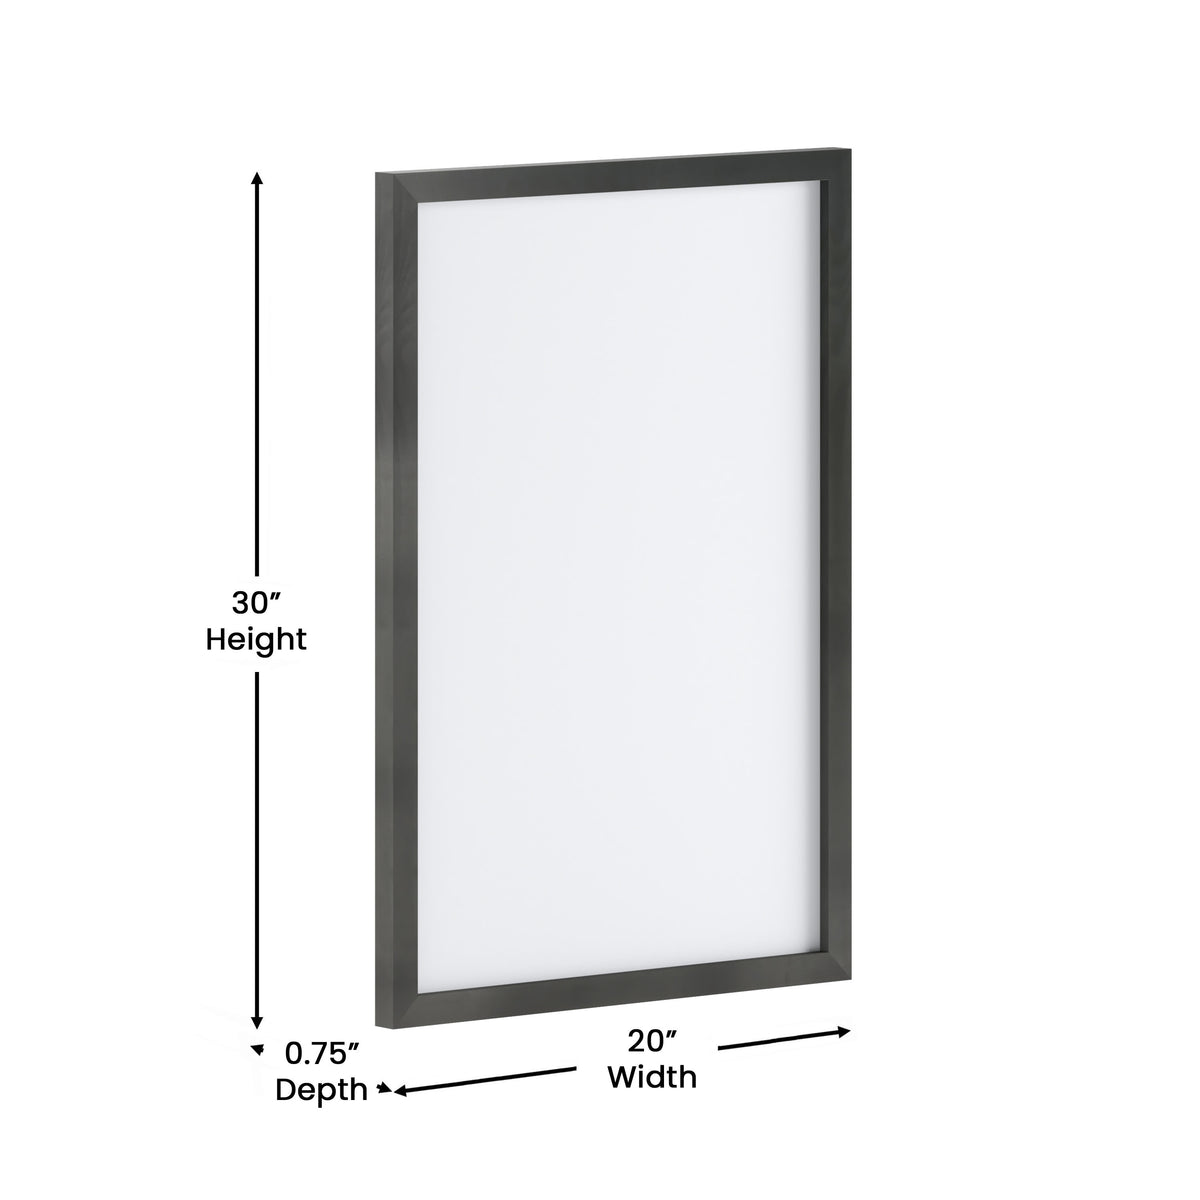 Black,20inchW x 30inchH |#| Commercial 20x30 White Board with Marker, Eraser, and 4 Magnets - Black